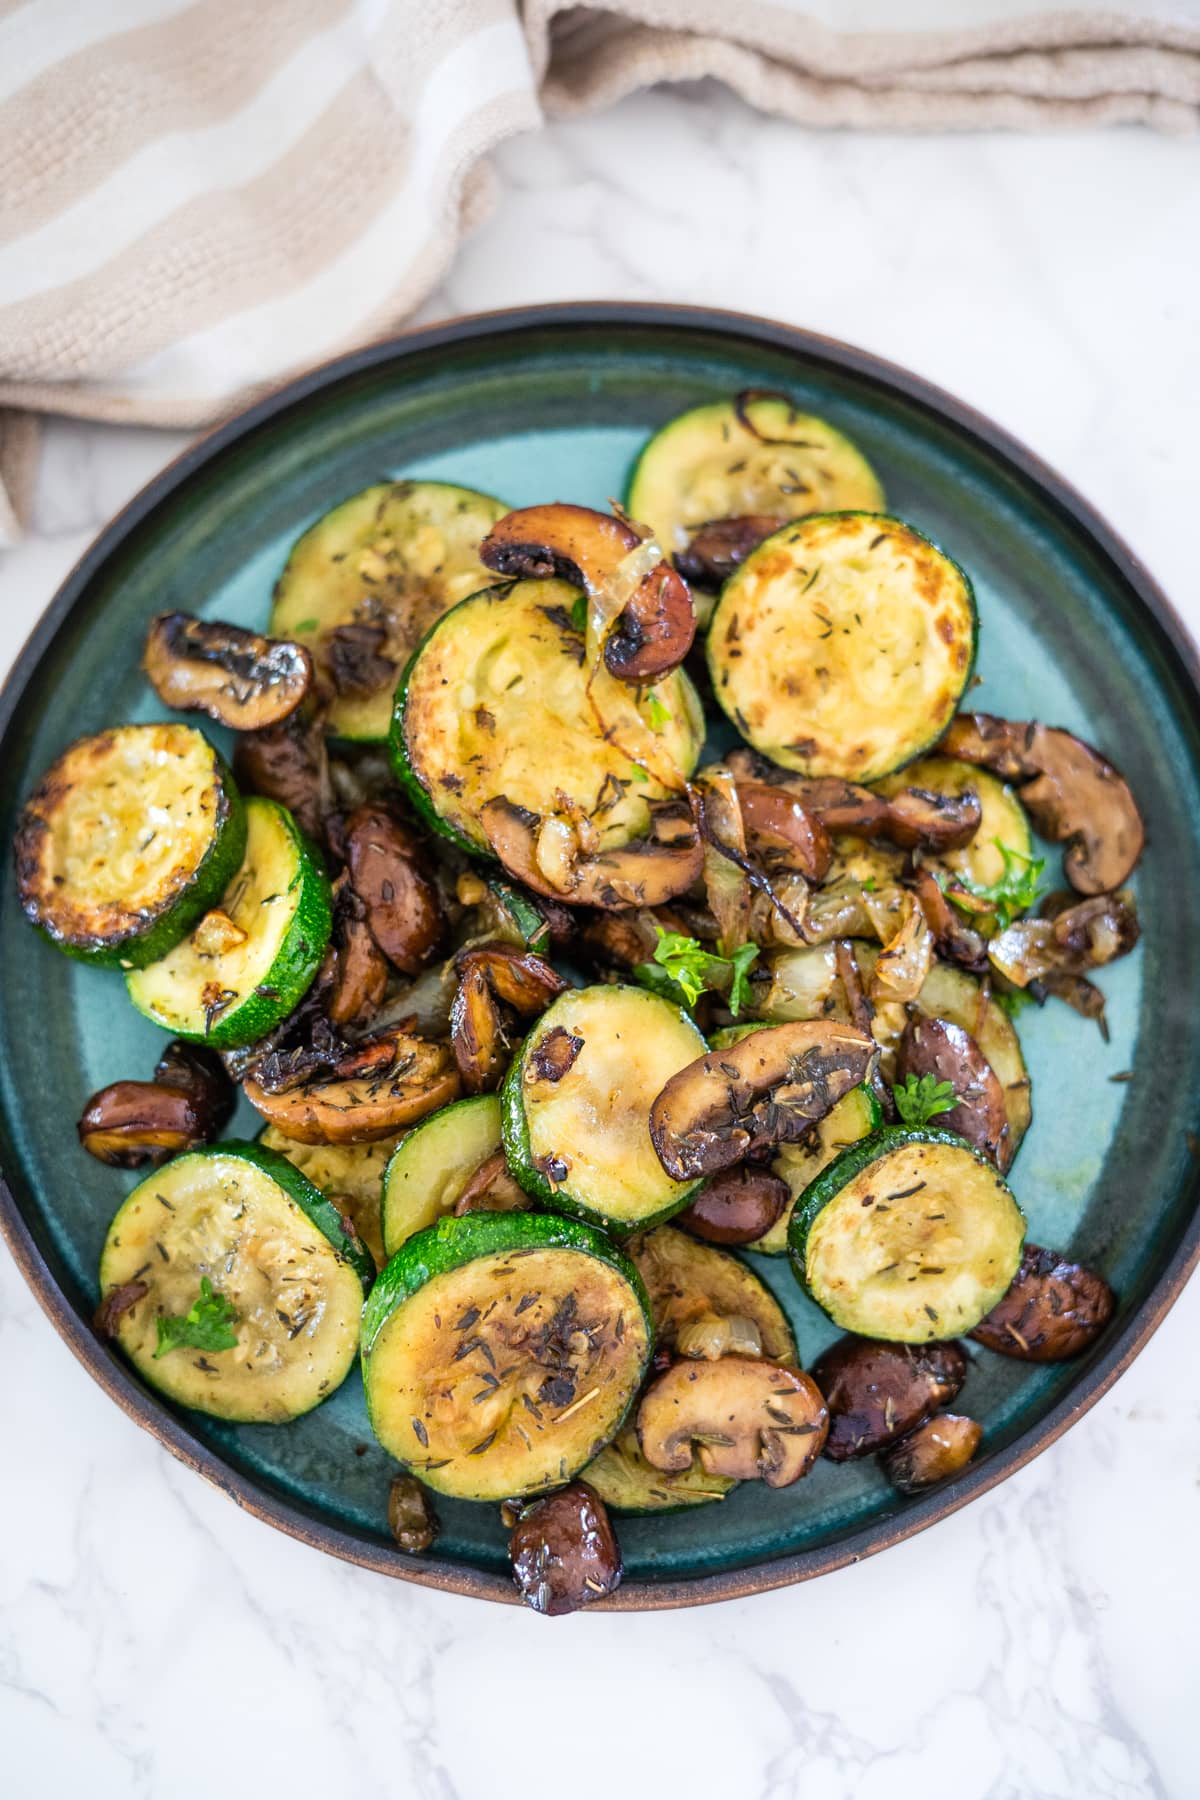 Grilled zucchini and mushrooms on a plate.